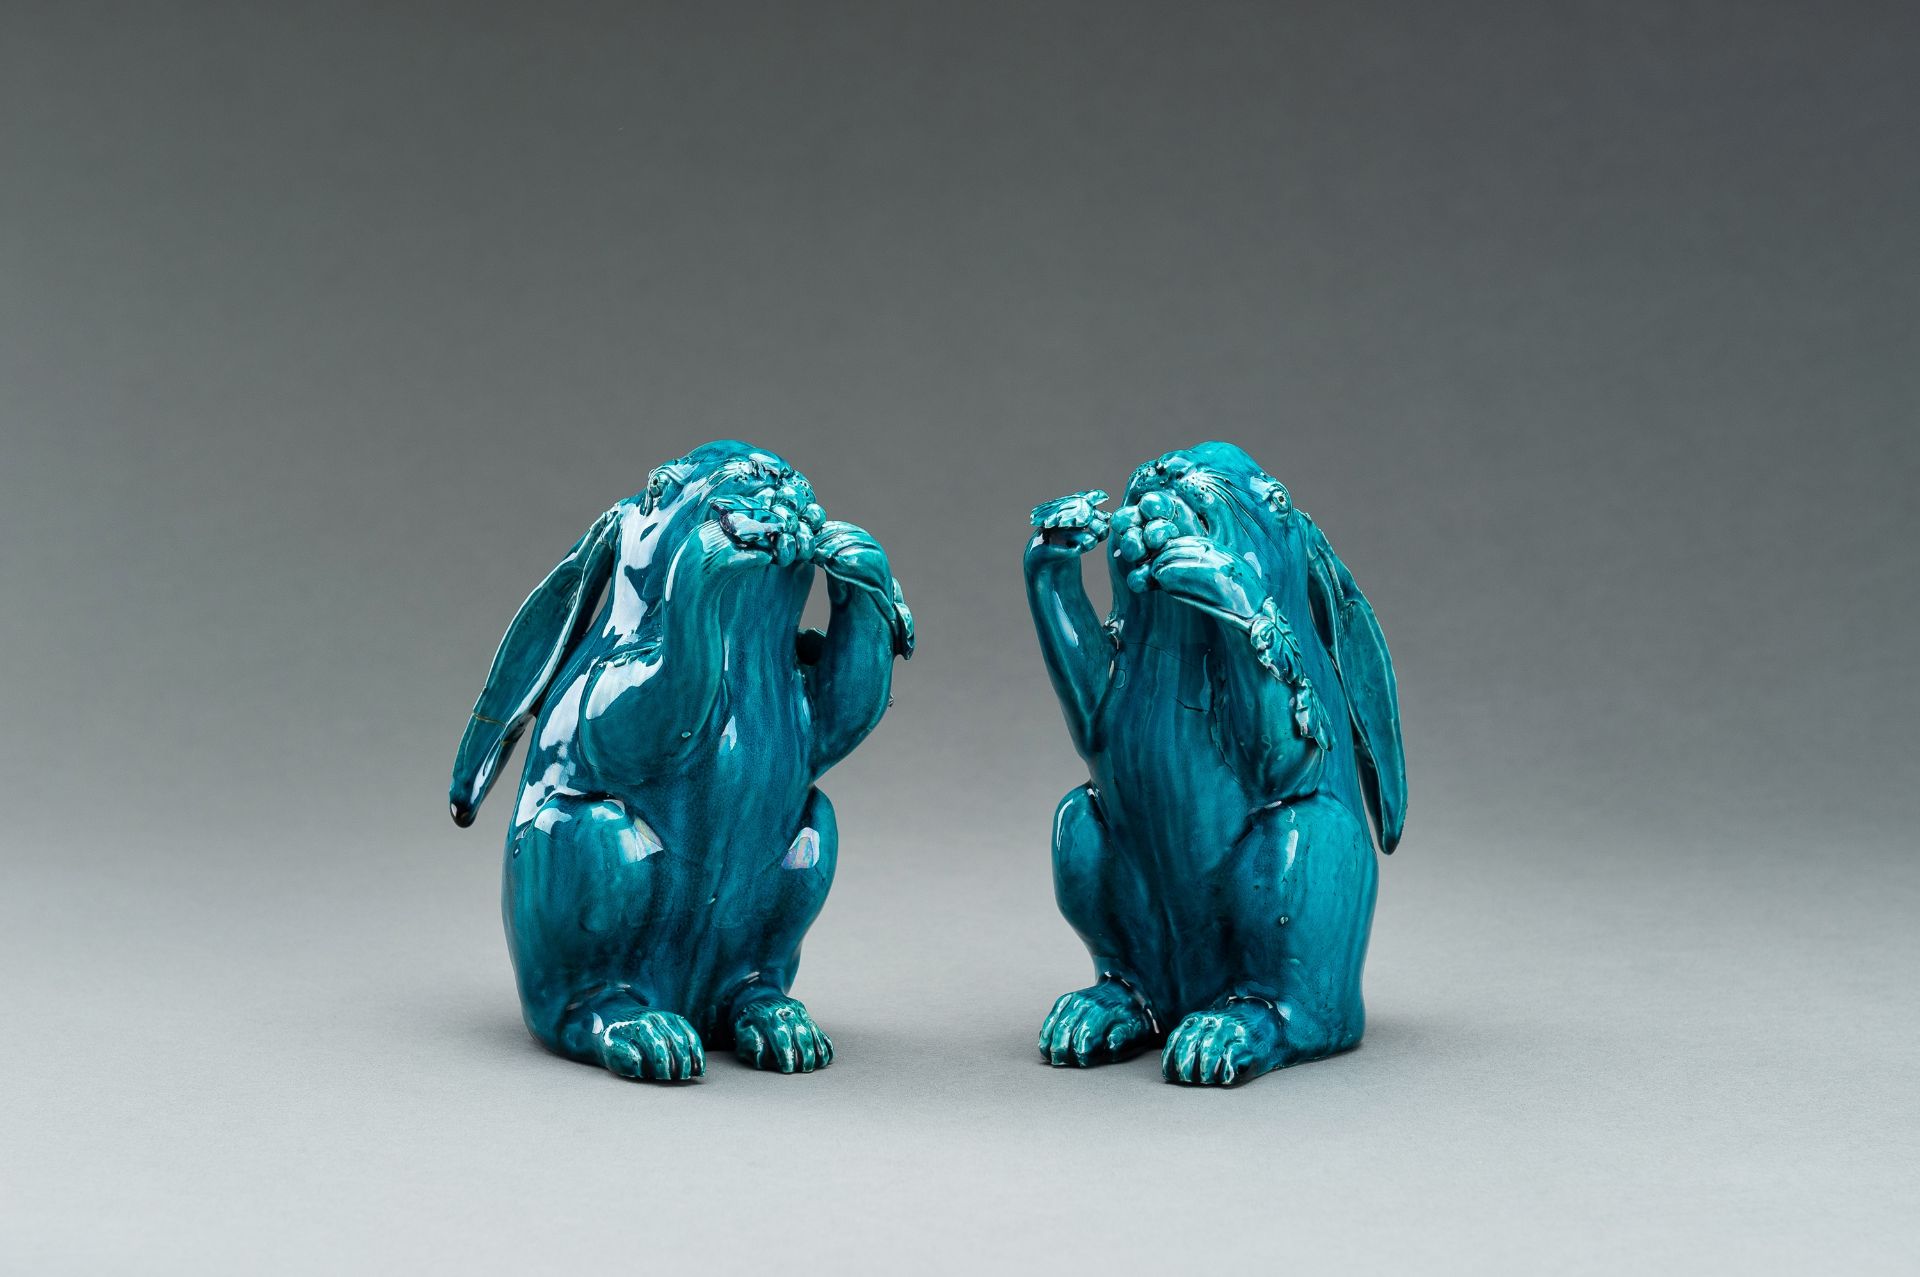 A PAIR OF TURQUOISE GLAZED CERAMIC FIGURES OF RABBITS EATING BERRIES - Image 6 of 10